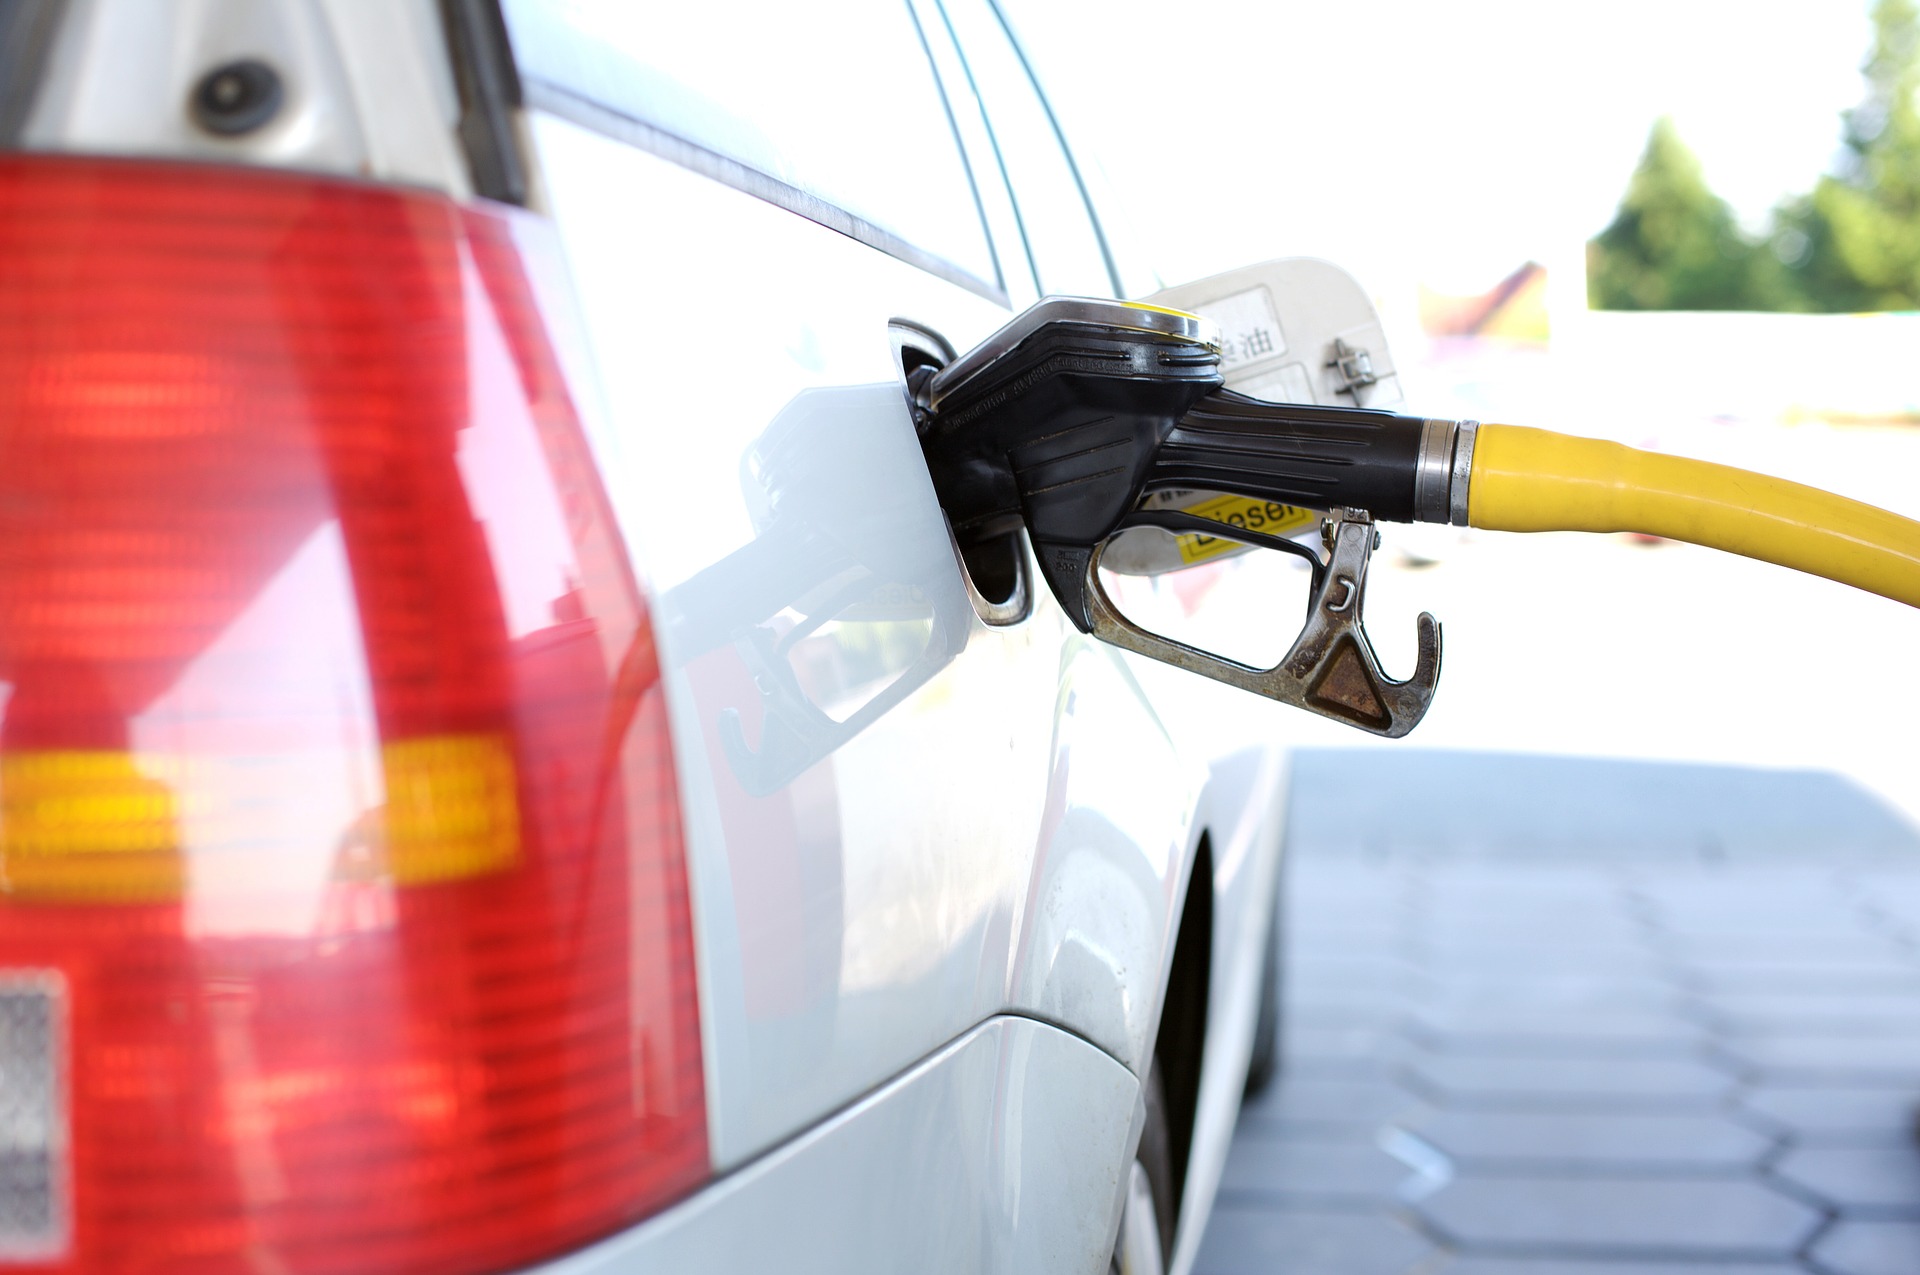 Big Fuel Price Hike Expected Next Week according to Oil Industry Management Bureau